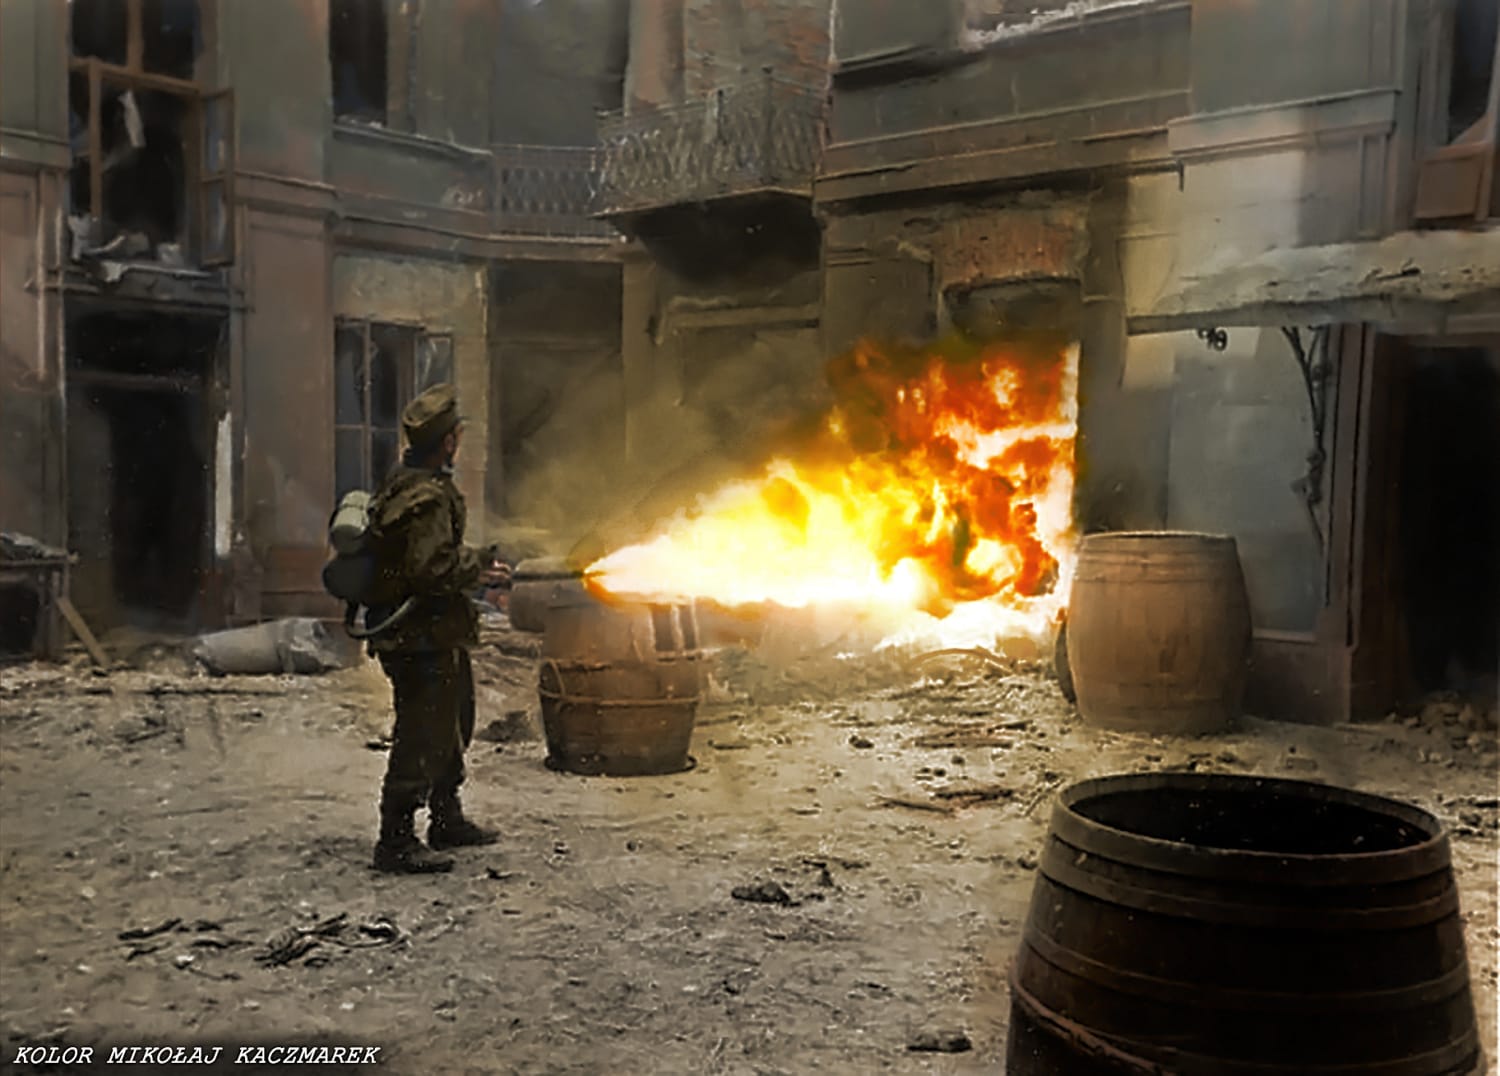 Germans set fire to buildings in Warsaw after the end of the Warsaw Uprising in 1944. "Every inhabitant must be killed, no prisoners may be taken. Warsaw is to be razed to the ground and thus an intimidating example for the whole of Europe is to be created"-Heinrich Himmler [Colorization]